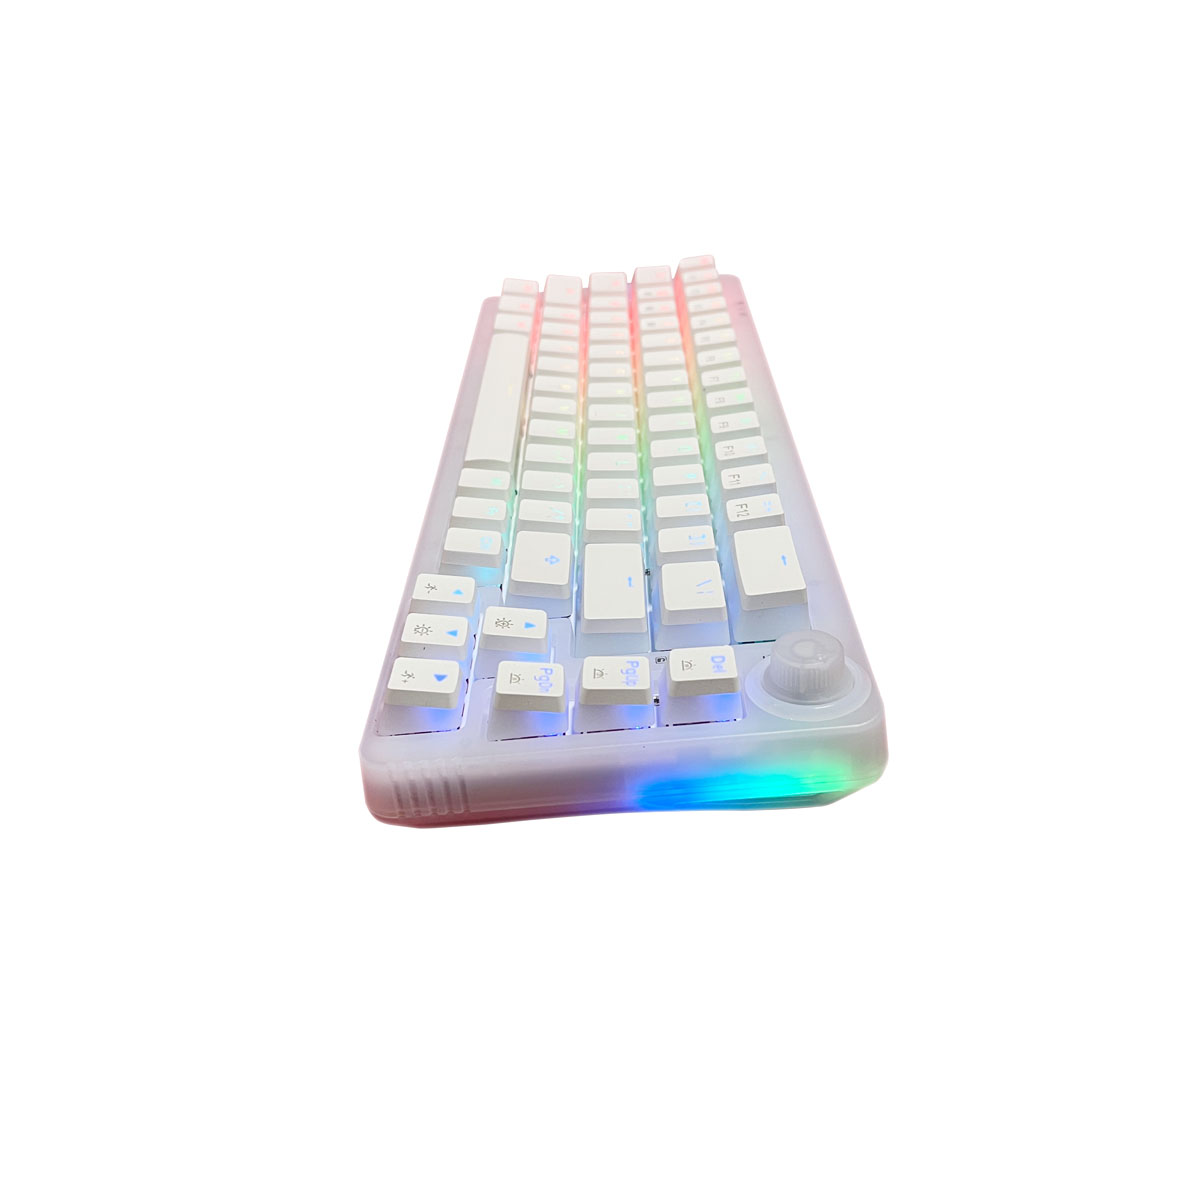 Find GAMAKAY LK67 Mechanical Keyboard 67 Keys Gamakay Customized Phenix/Crystal/Wasp Switch Hot Swapable Triple Mode Type C Wired bluetooth 2 4G Wireless OEM Profile Pudding Keycaps RGB Backlit Gaming Keyboard with Rotate Button Custom Keyboard for Sale on Gipsybee.com with cryptocurrencies